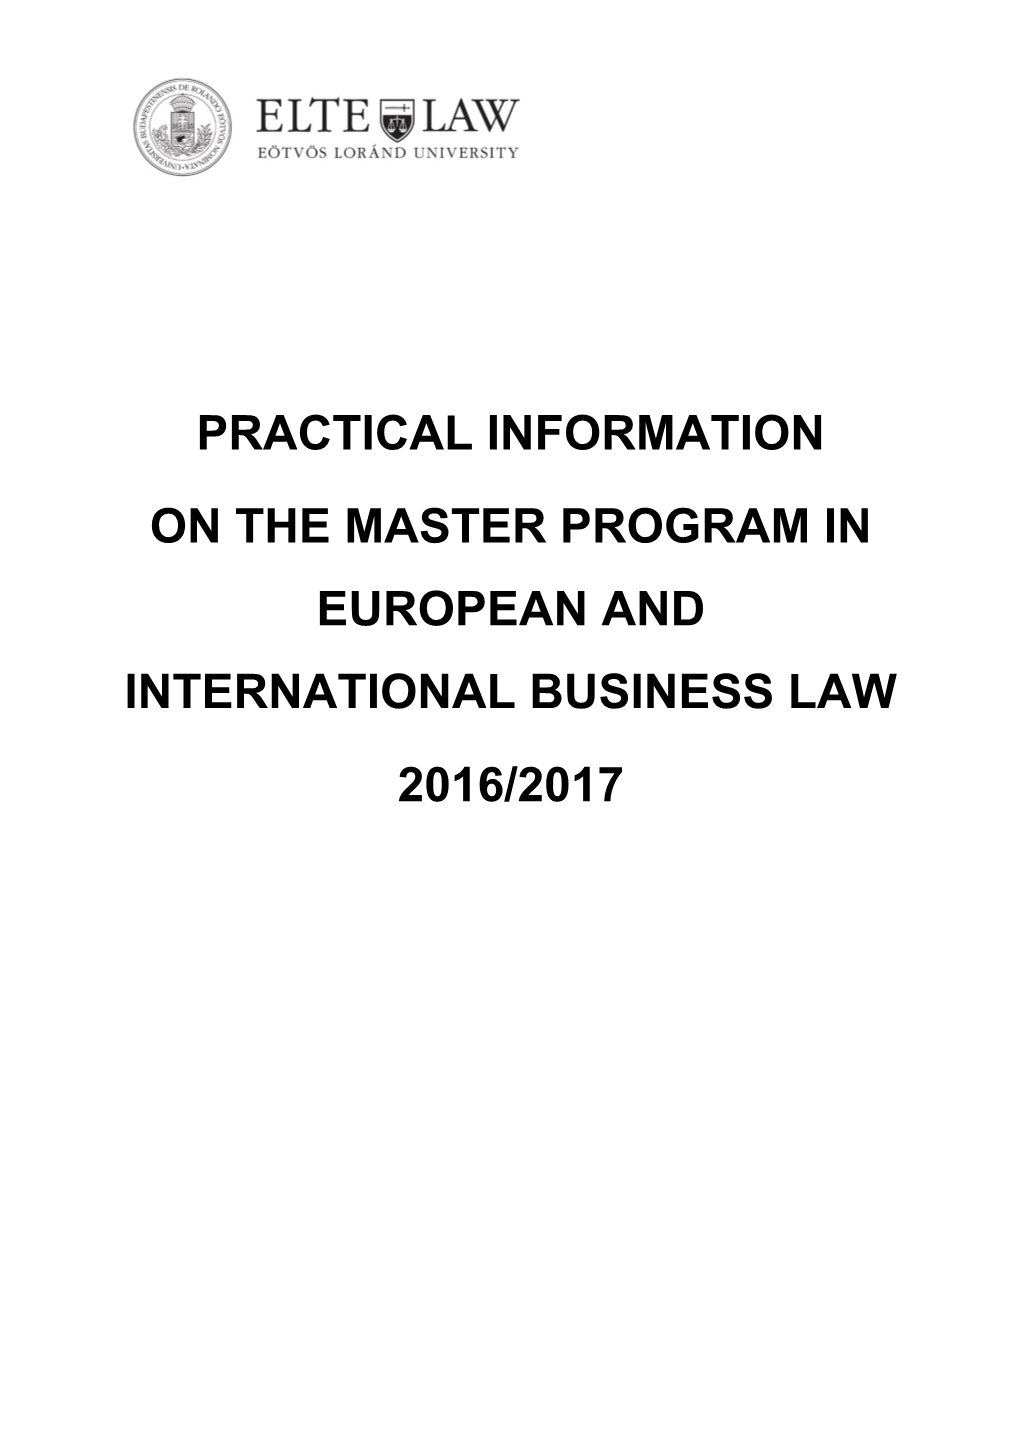 On the Master Program in European and International Business Law